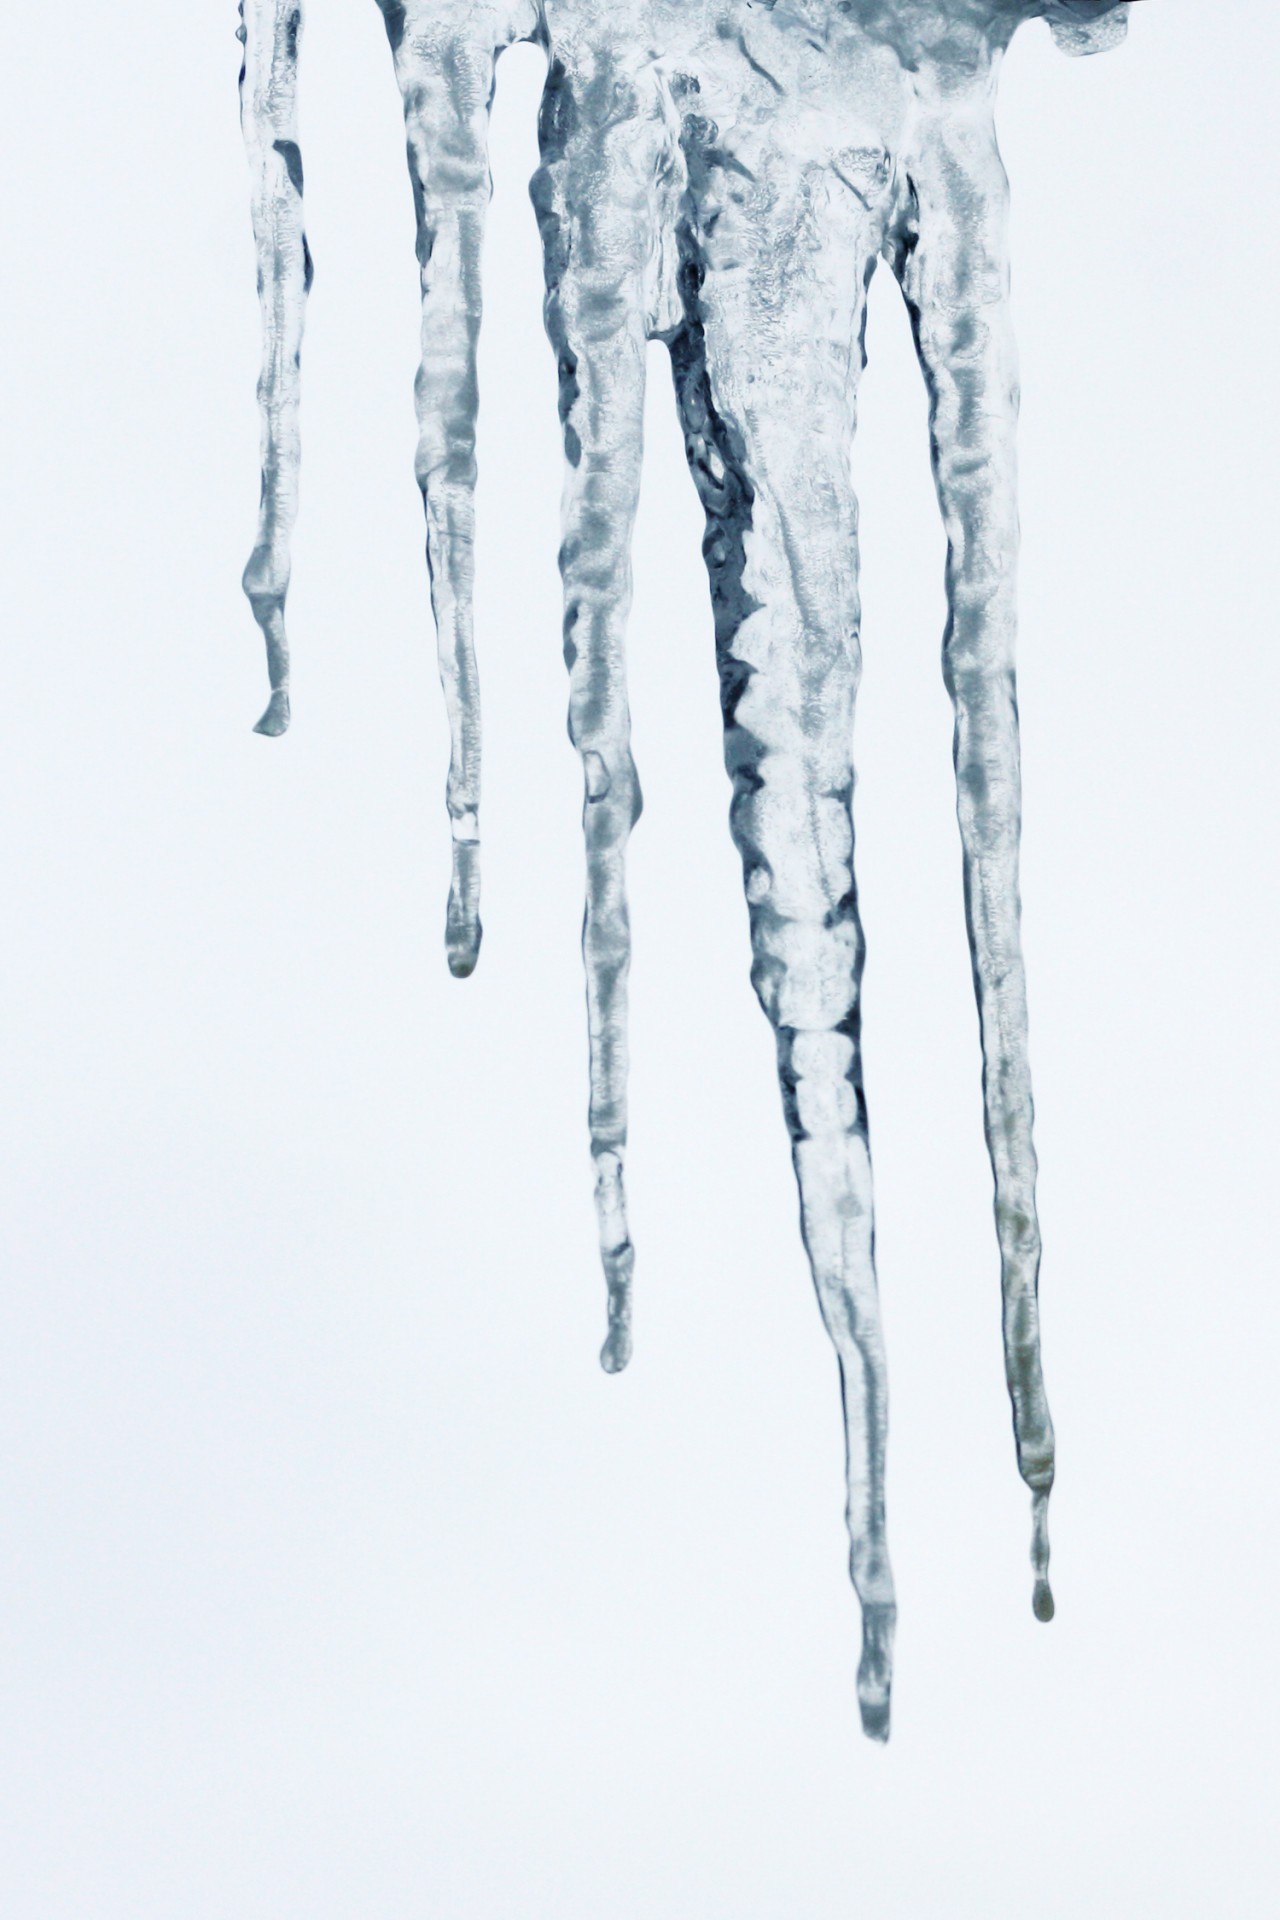 Icicles Free Stock Photo - Public Domain Pictures